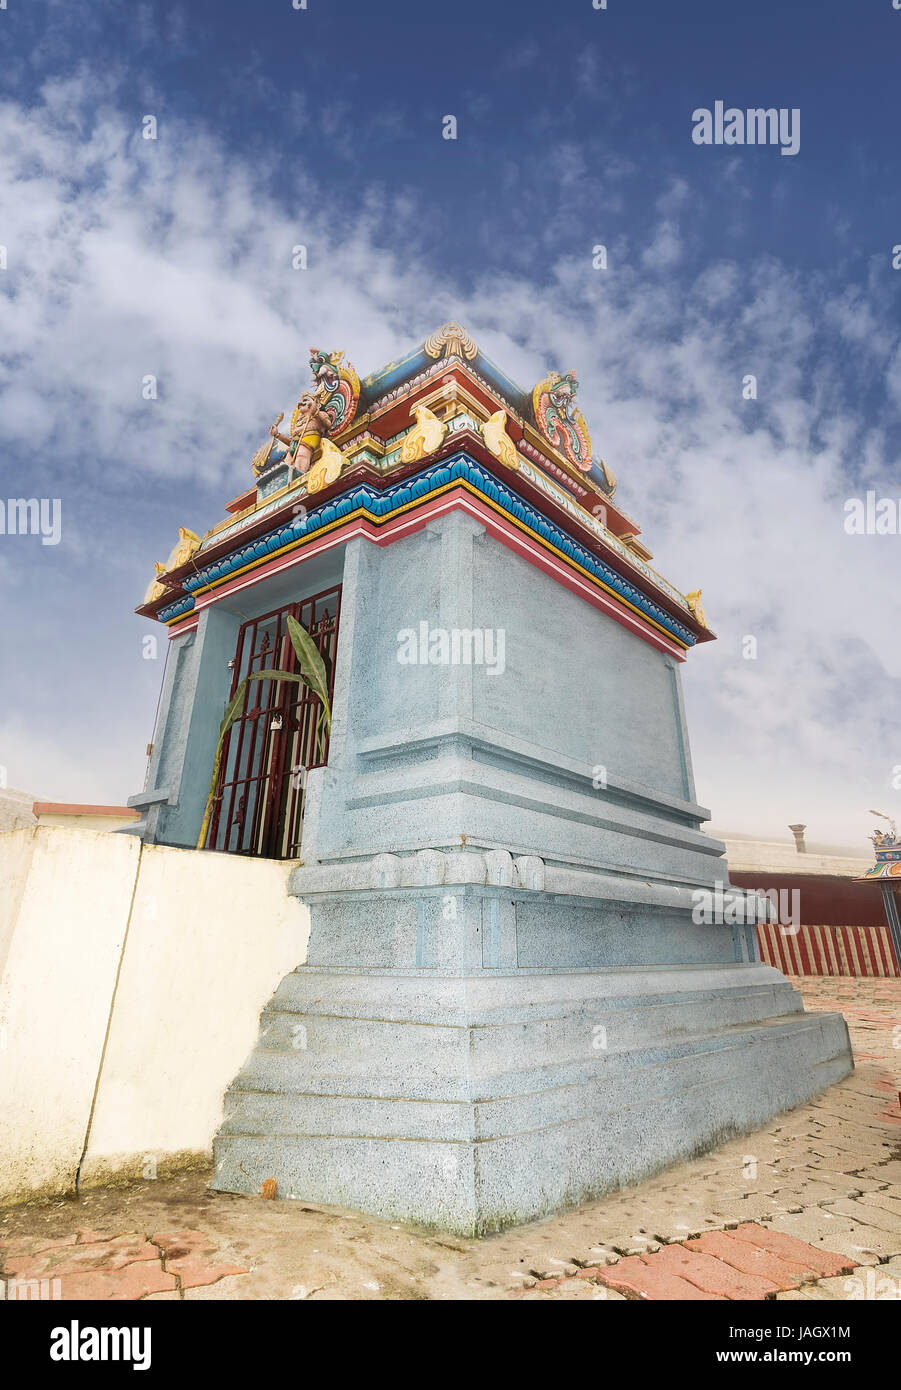 Architecture of a South Indian Temple 'Kuzhanthai Velappar' at village Poombarai. The temple has three thousand years of history and was consecrated b Stock Photo